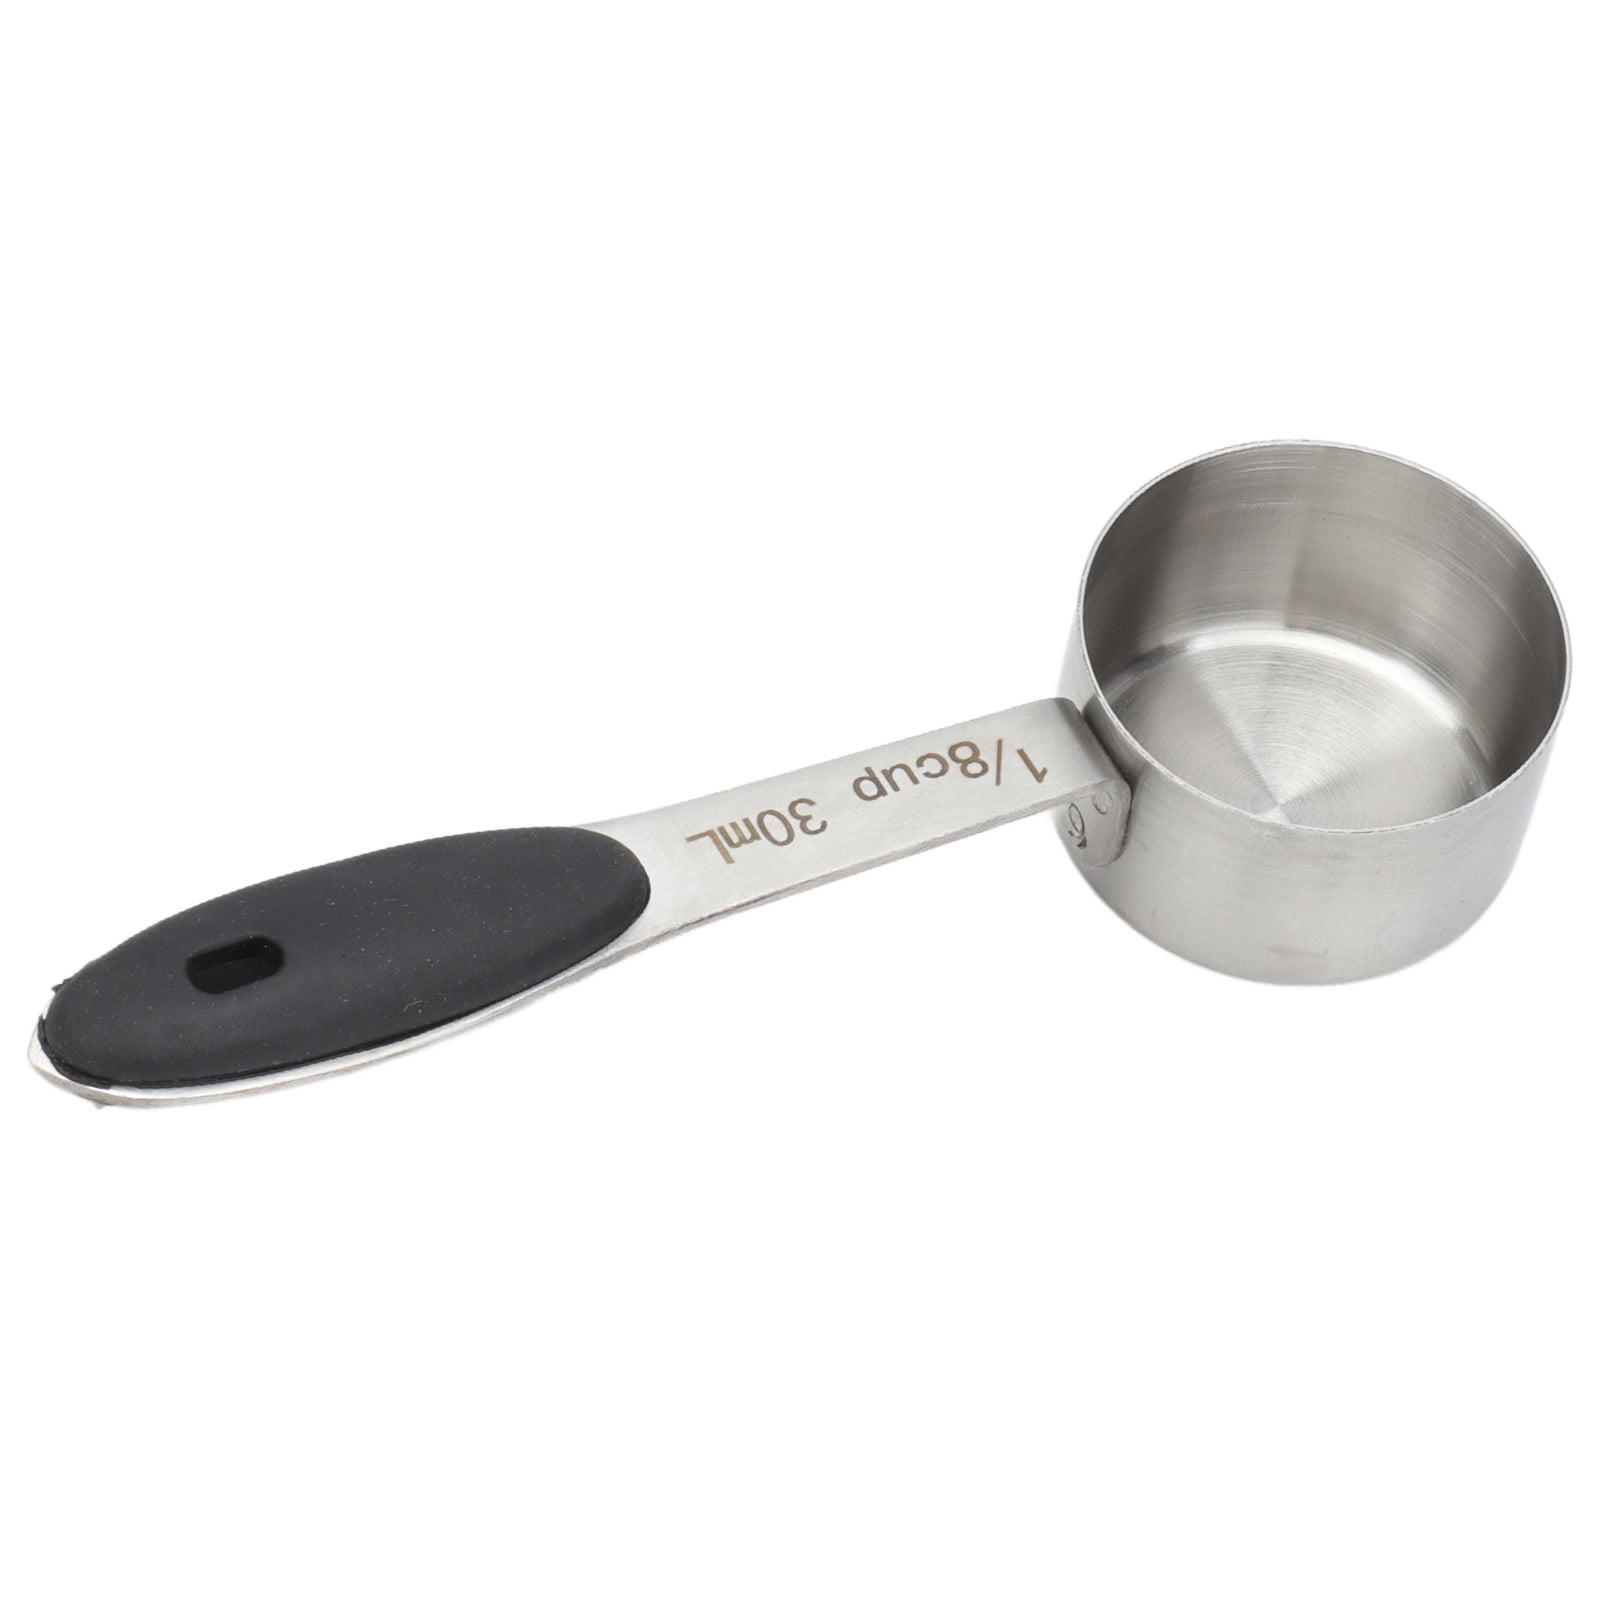 2Pcs Stainless Steel Coffee Measuring Scoop 1/8 Cup 30ml Measuring NY